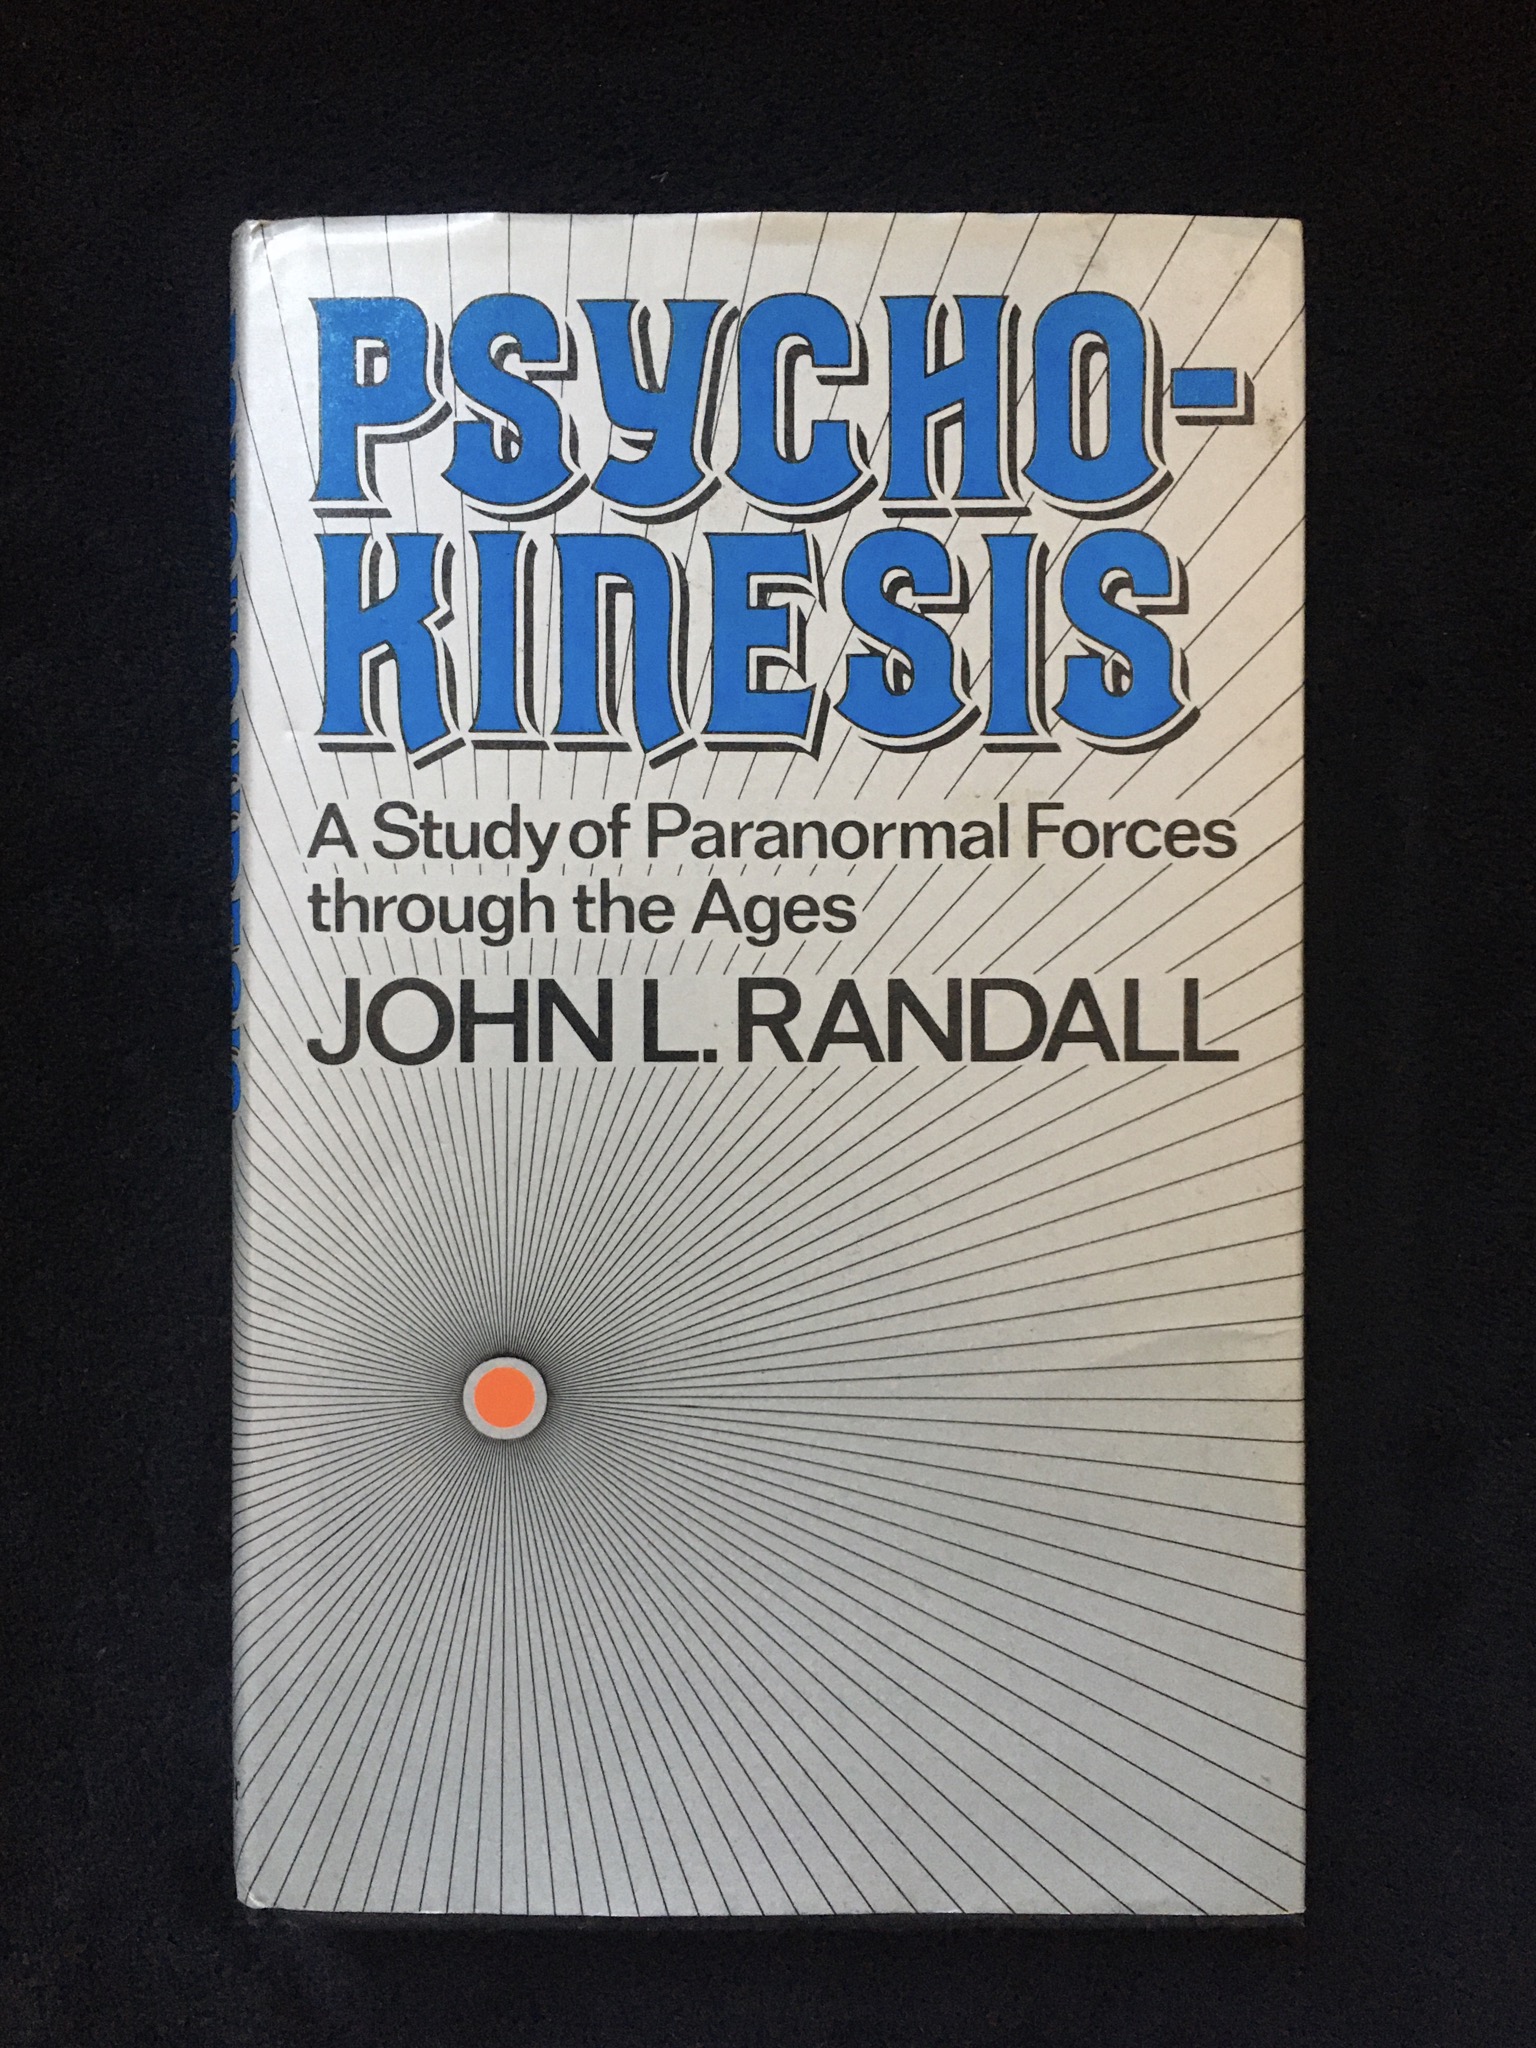 Psychokinesis: A Study of Paranormal Forces Throughout the Ages John L. Randall